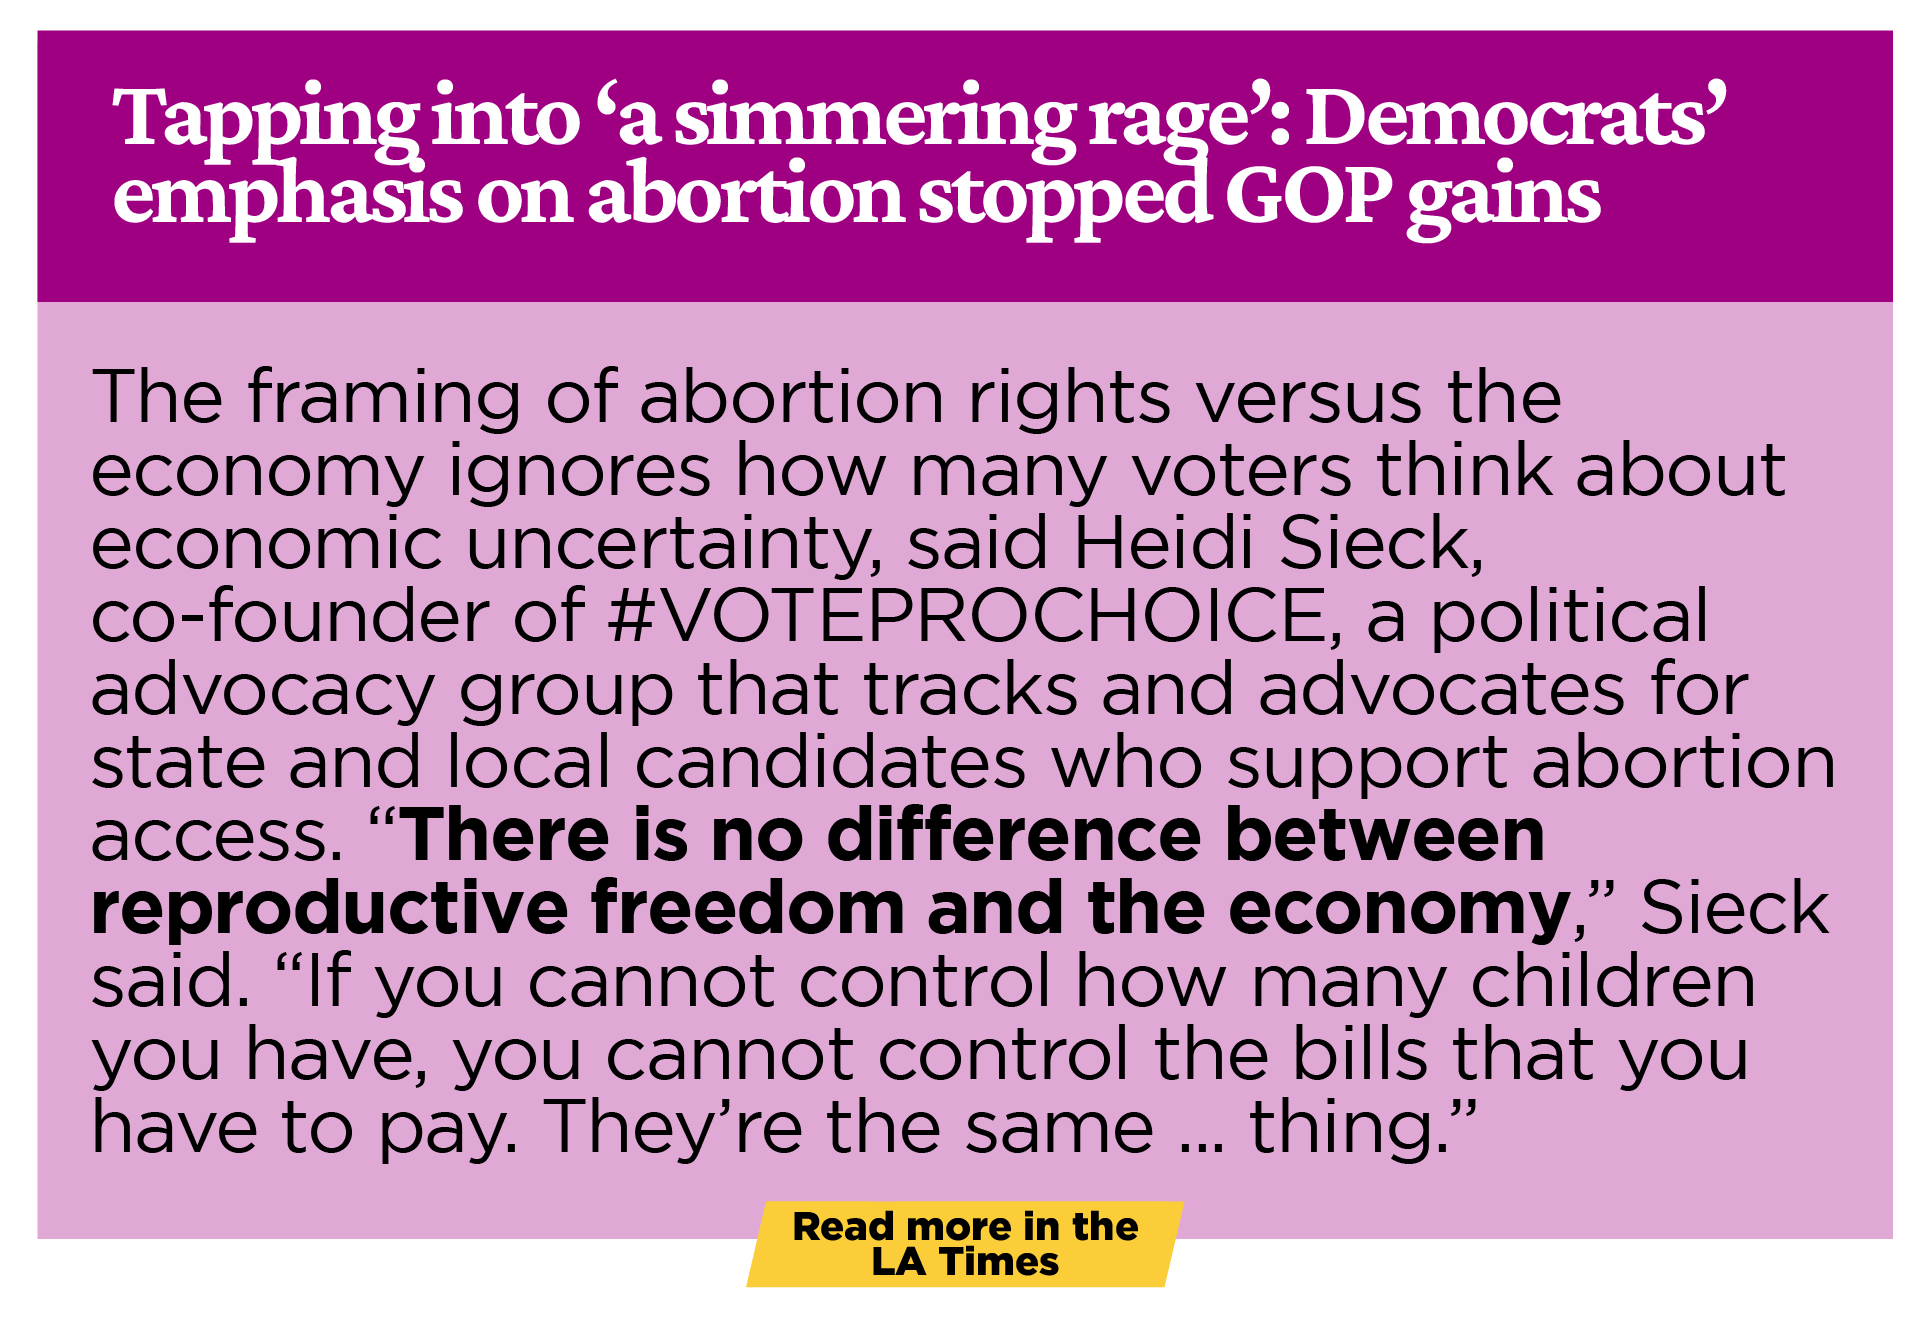 Tapping into ‘a simmering rage’: Democrats’ emphasis on abortion stopped GOP gains:The framing of abortion rights versus the economy ignores how many voters think about economic uncertainty, said Heidi Sieck, co-founder of #VOTEPROCHOICE, a political advocacy group that tracks and advocates for state and local candidates who support abortion access. “There is no difference between reproductive freedom and the economy,” Sieck said. “If you cannot control how many children you have, you cannot control the bills that you have to pay. They’re the same ... thing.”